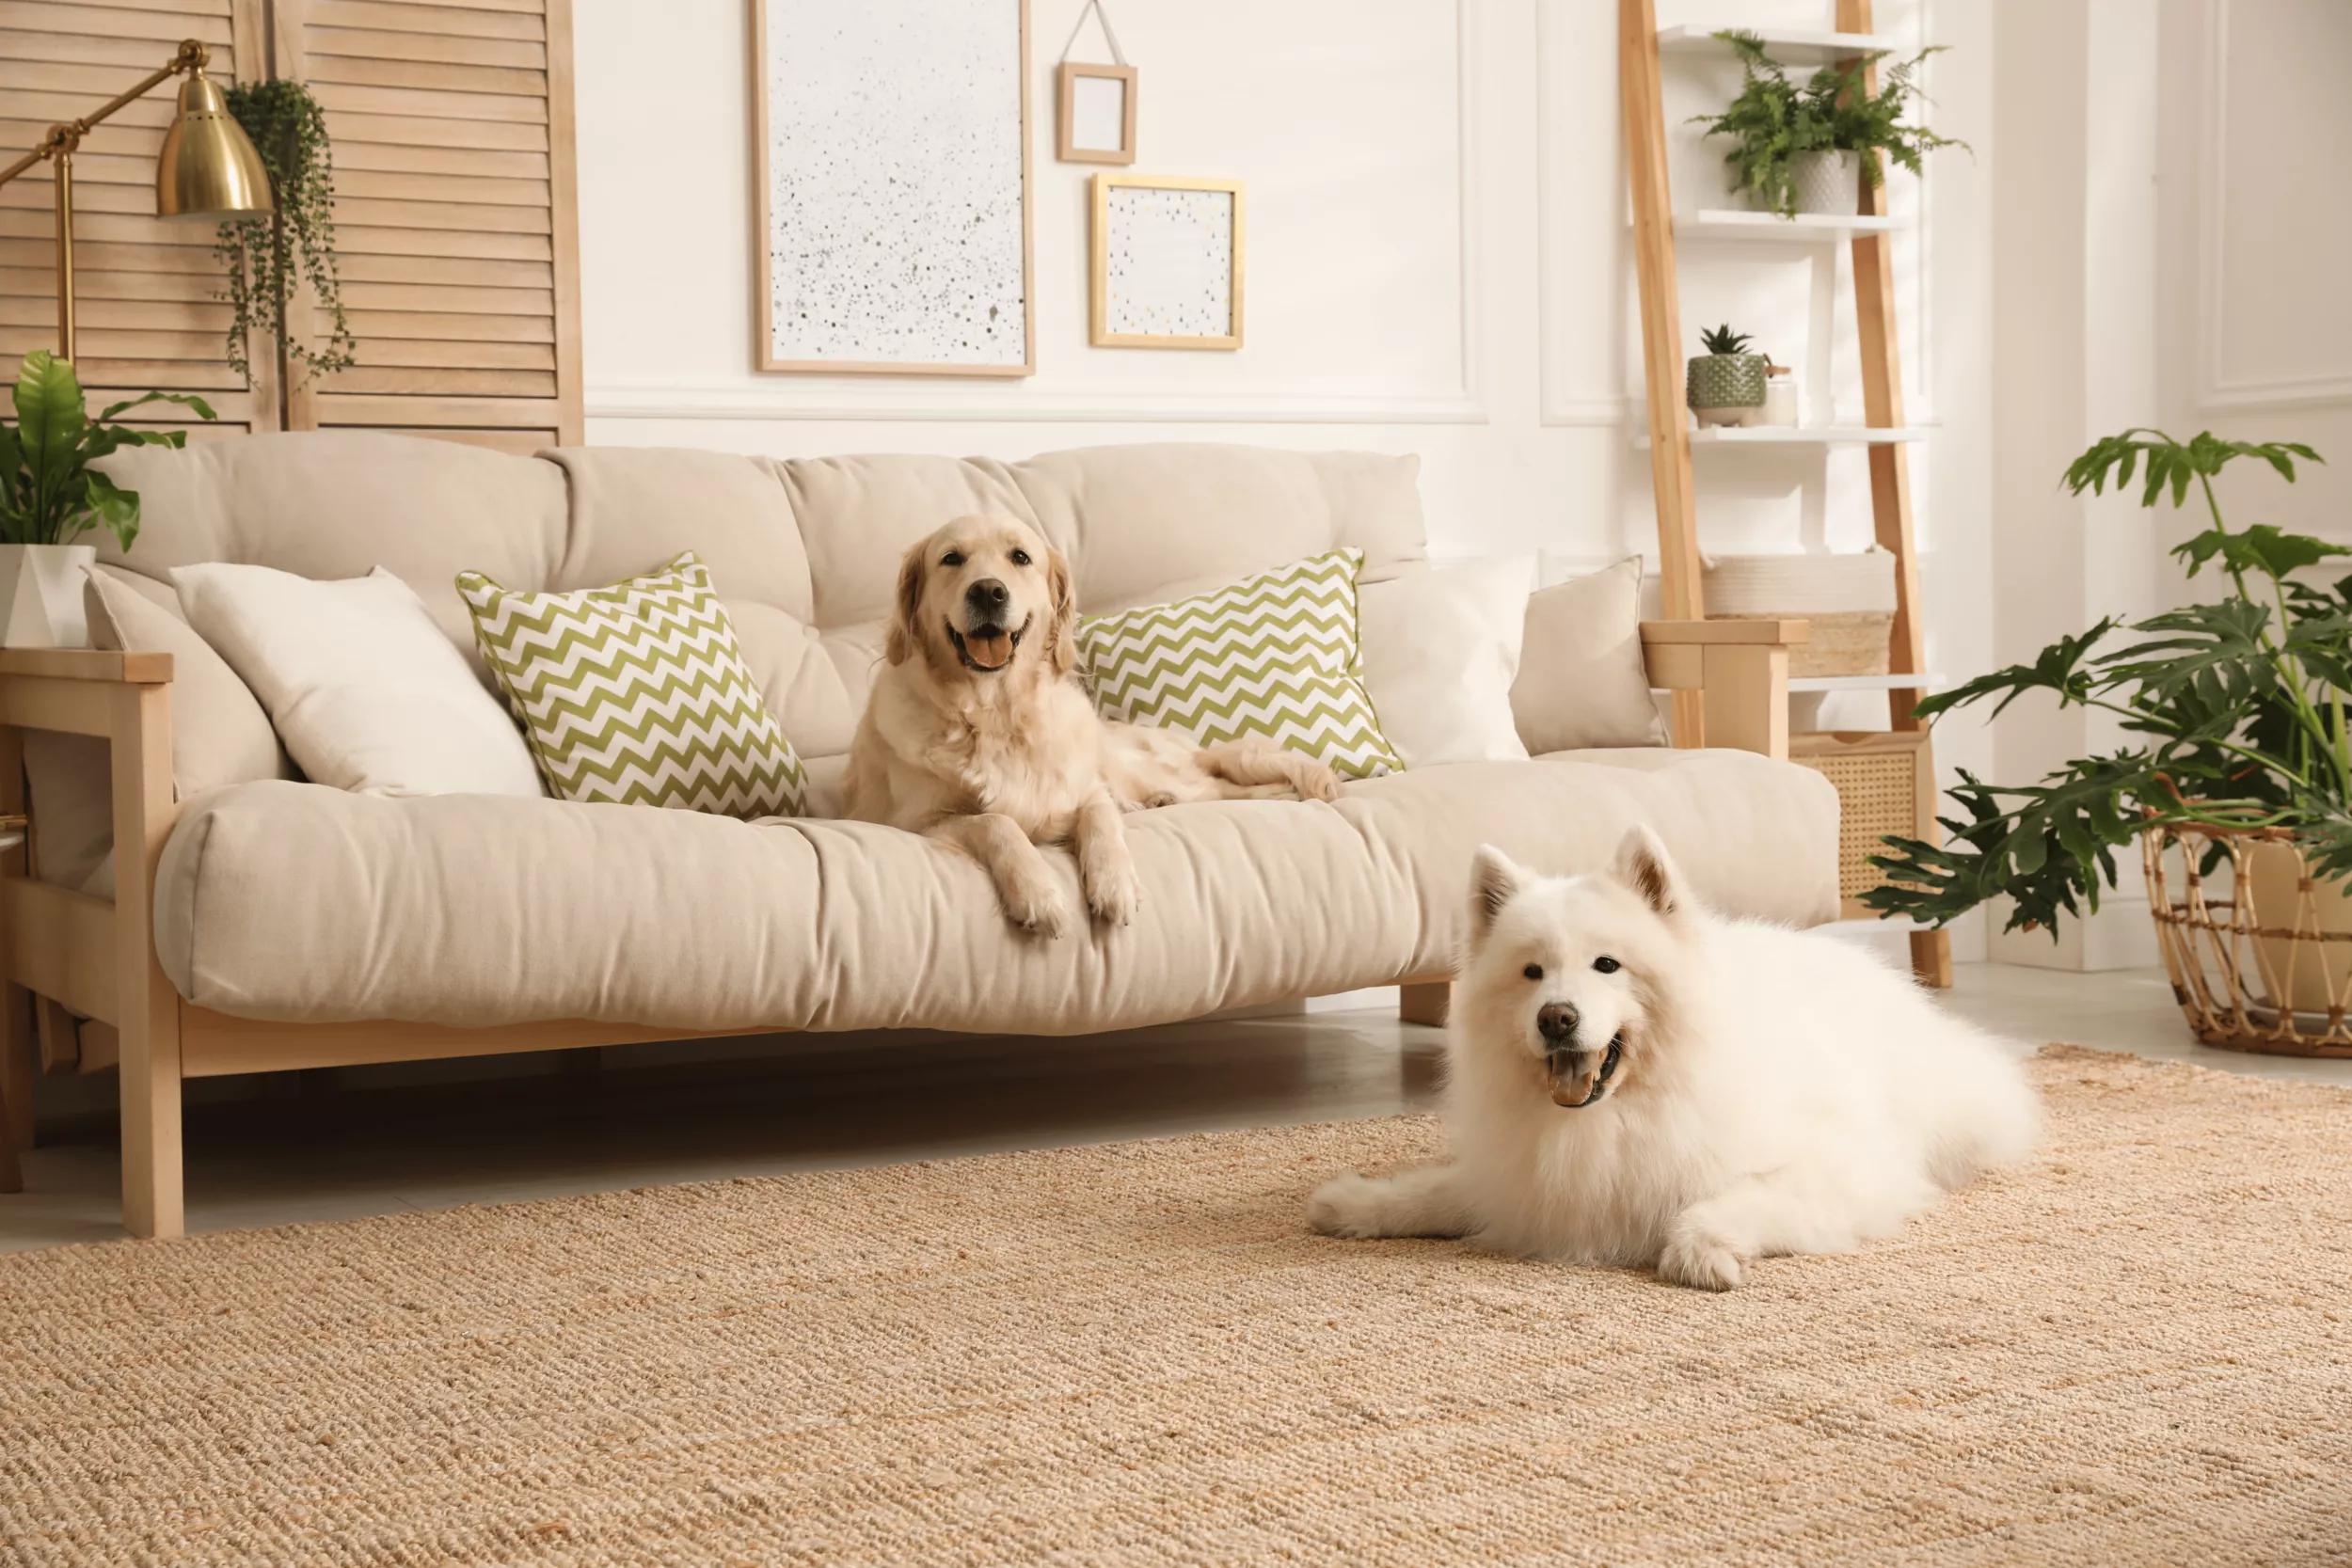 Two happy dogs sitting in a stylish home.